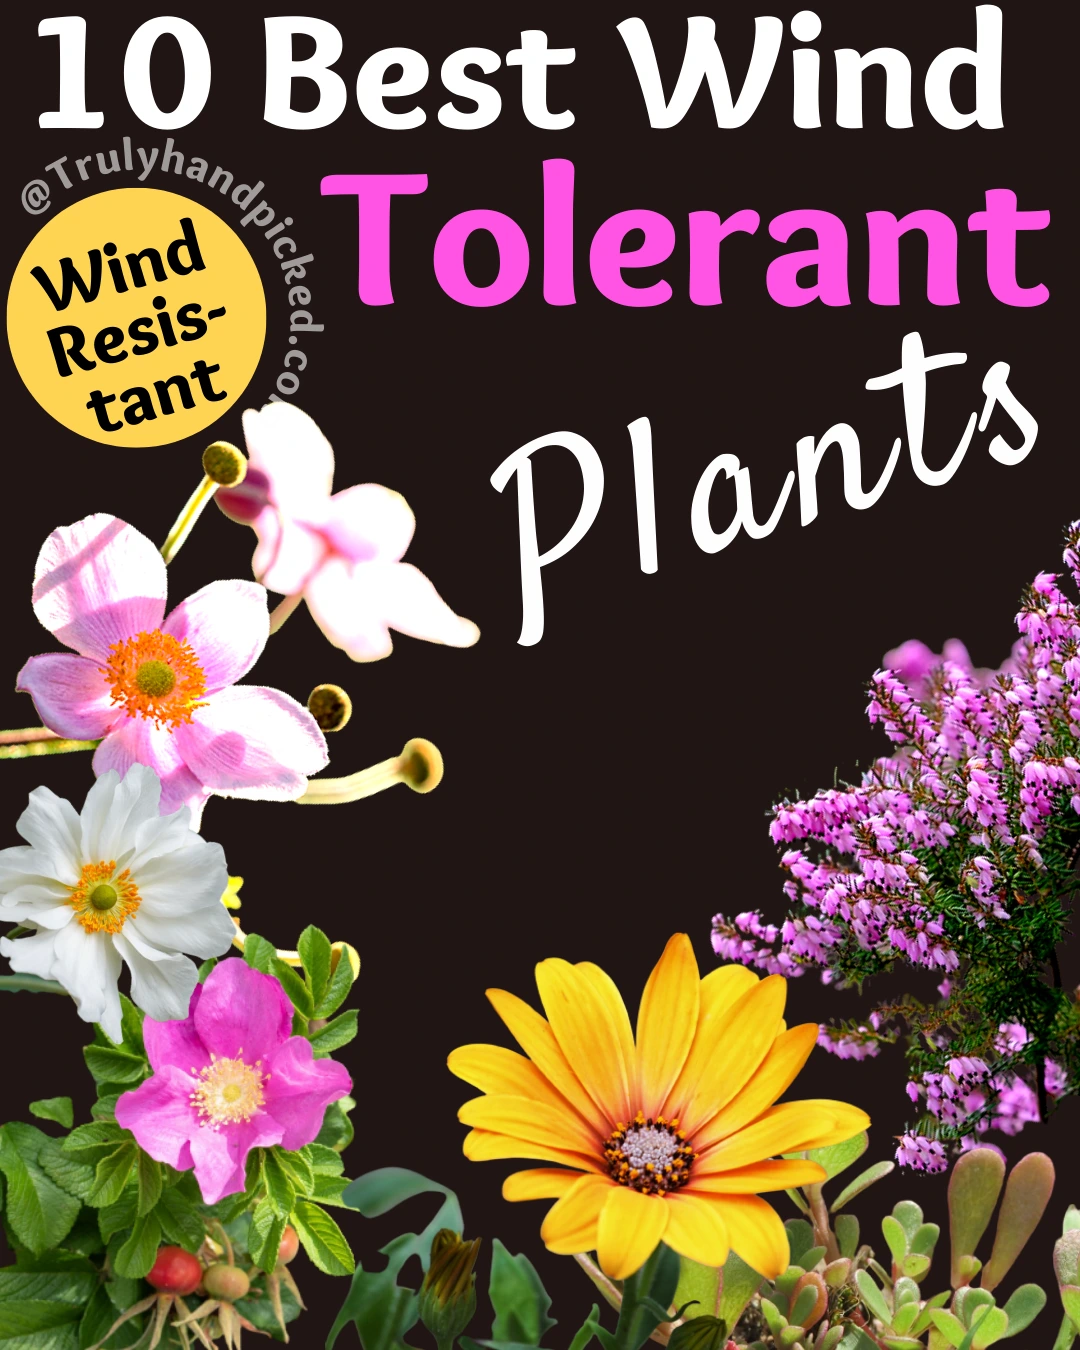 Best Wind Tolerant and Drought Resistant Plants for Your Garden